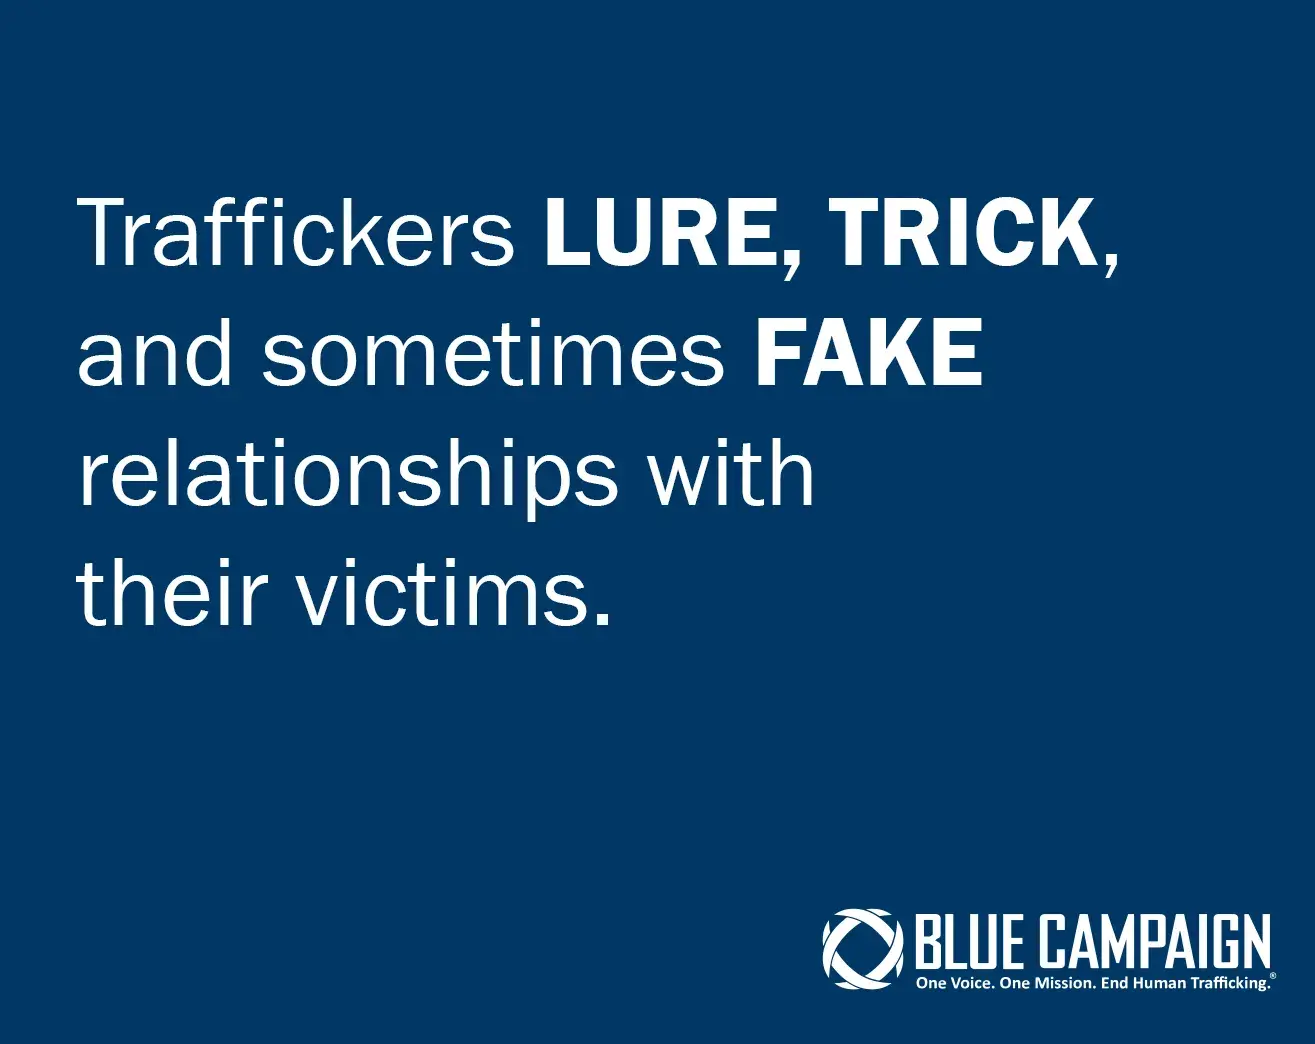 Traffickers lure, trick, and sometimes fake relationships with their victims.